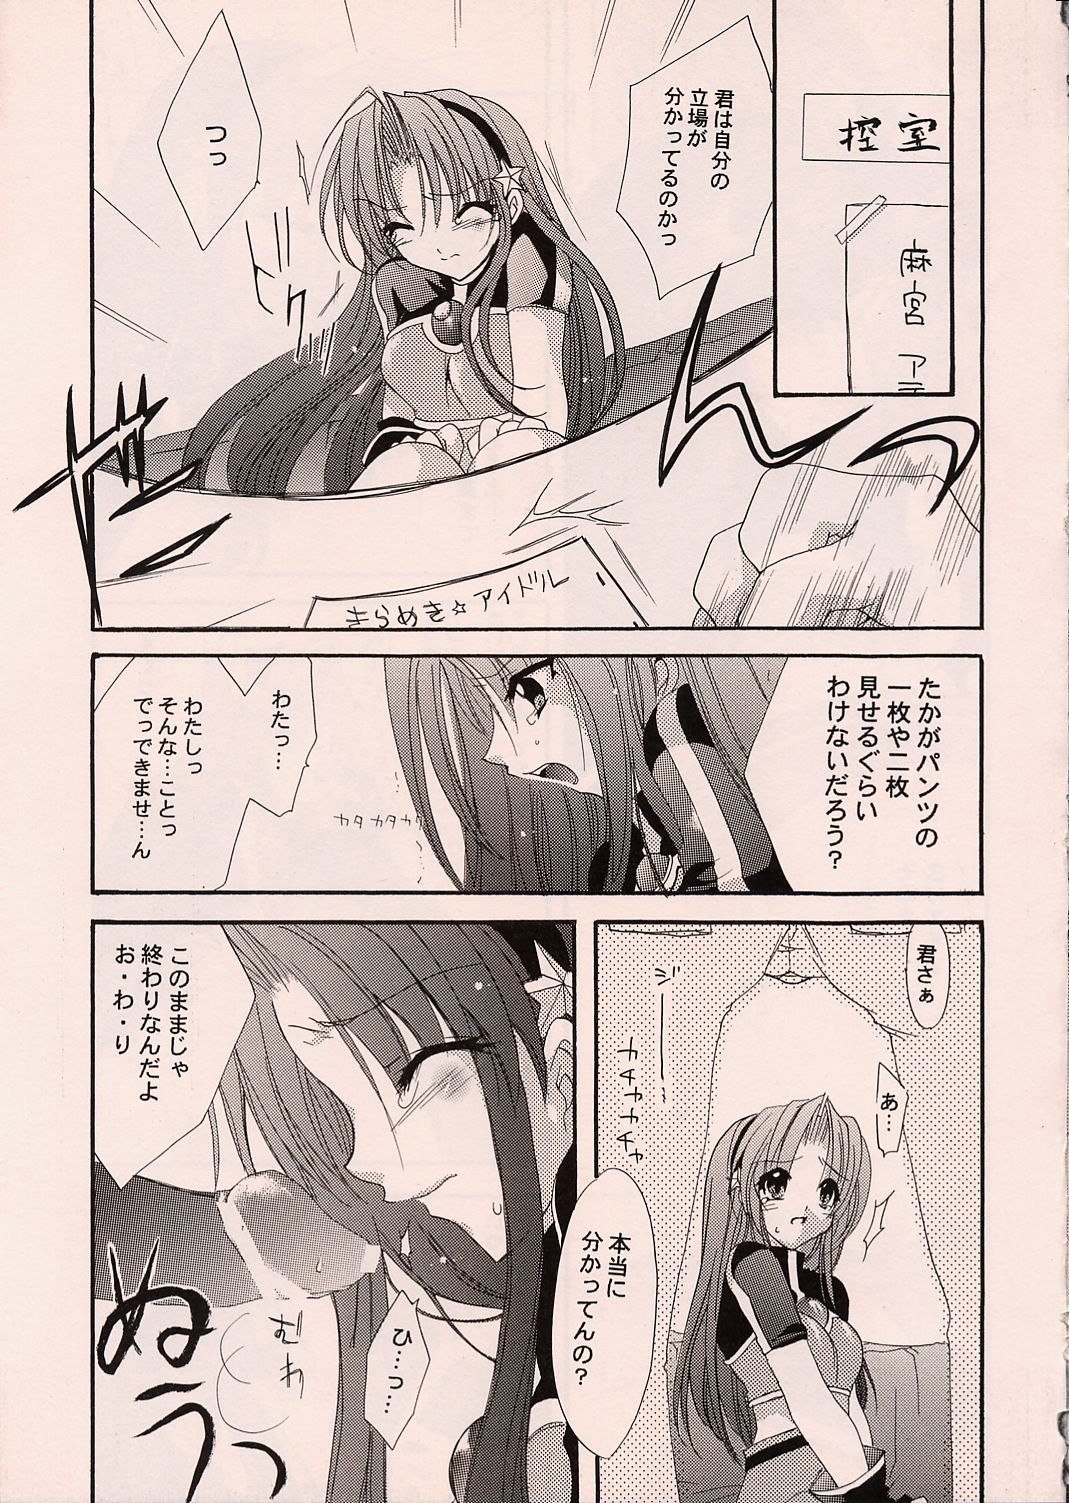 [Fantasy Wind (Shinano Yura)] HURRY! (King of Fighters) page 4 full